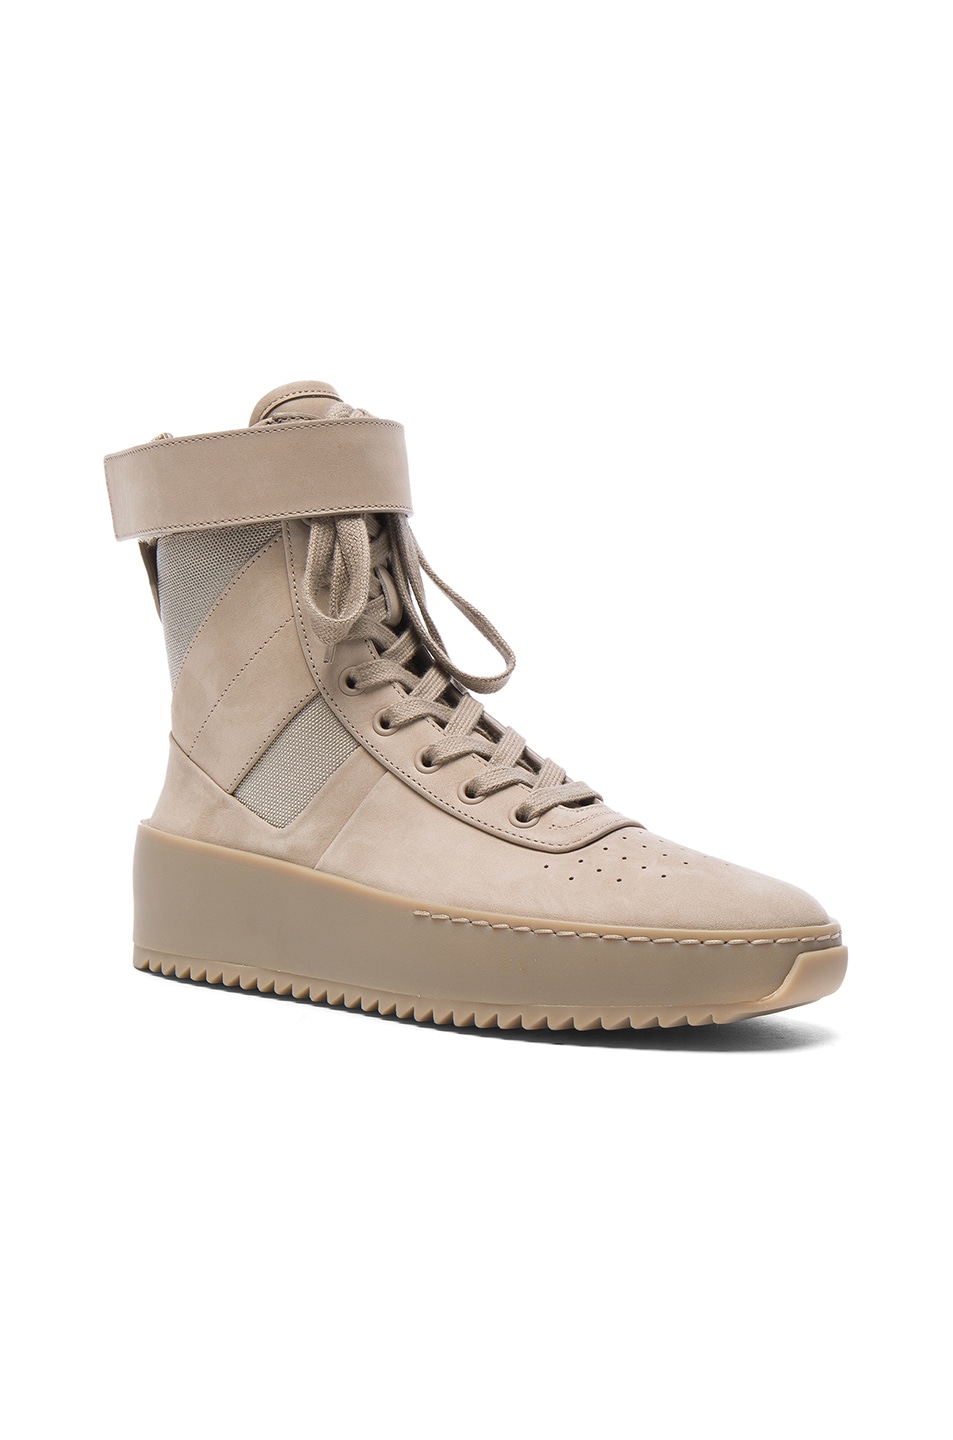 Image 1 of Fear of God Nubuck Leather Military Sneakers in Desert Beige